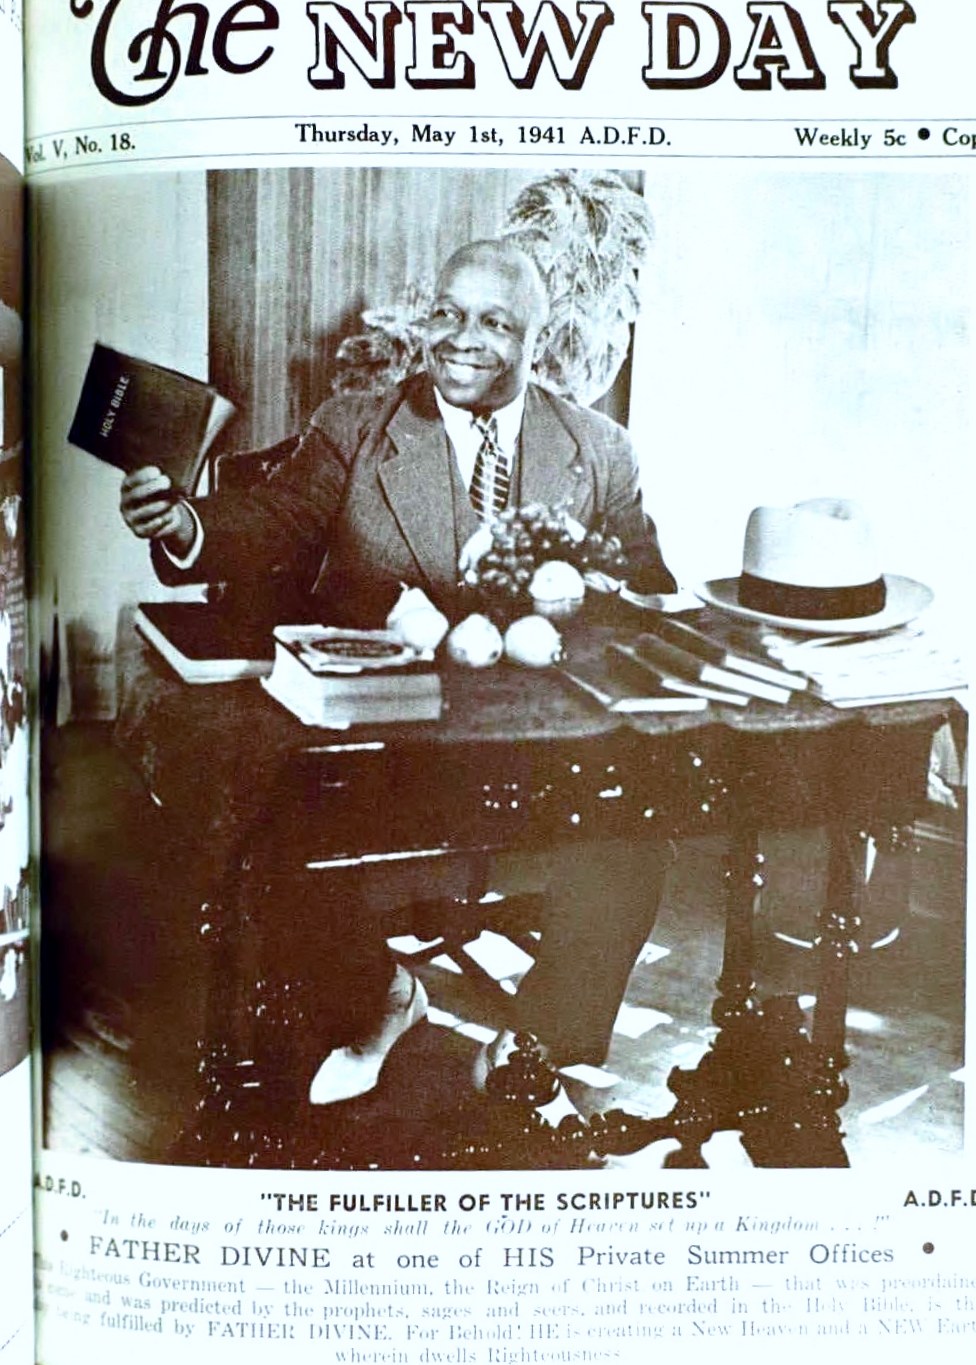 FATHER DIVINE at His office desk.